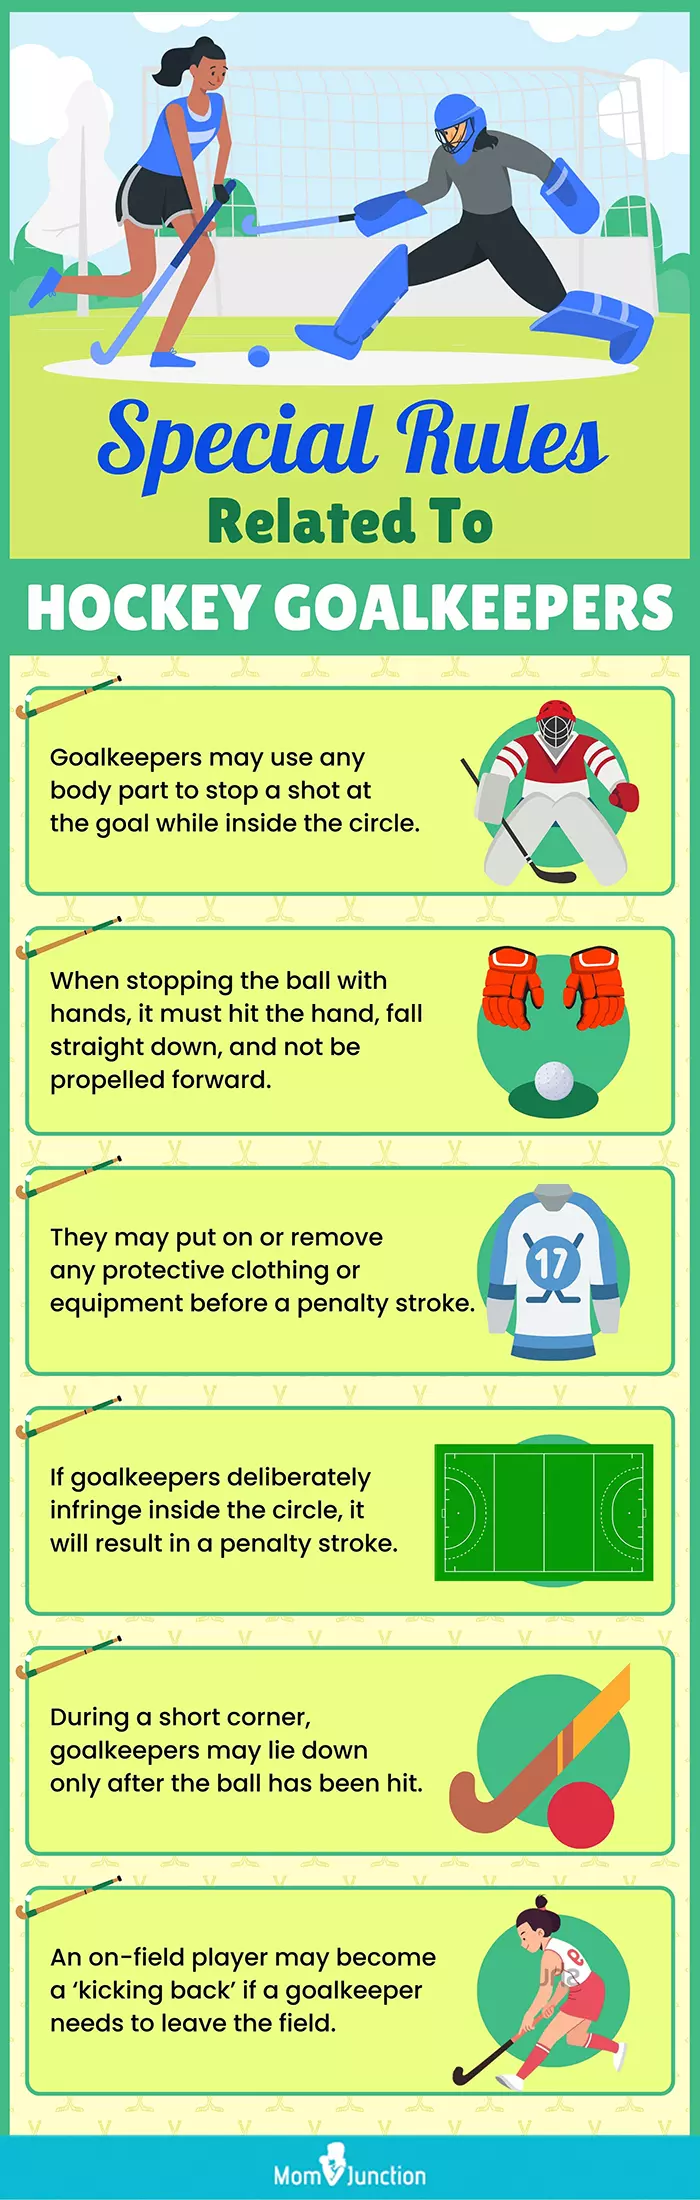 special rules related to hockey goalkeepers (infographic)